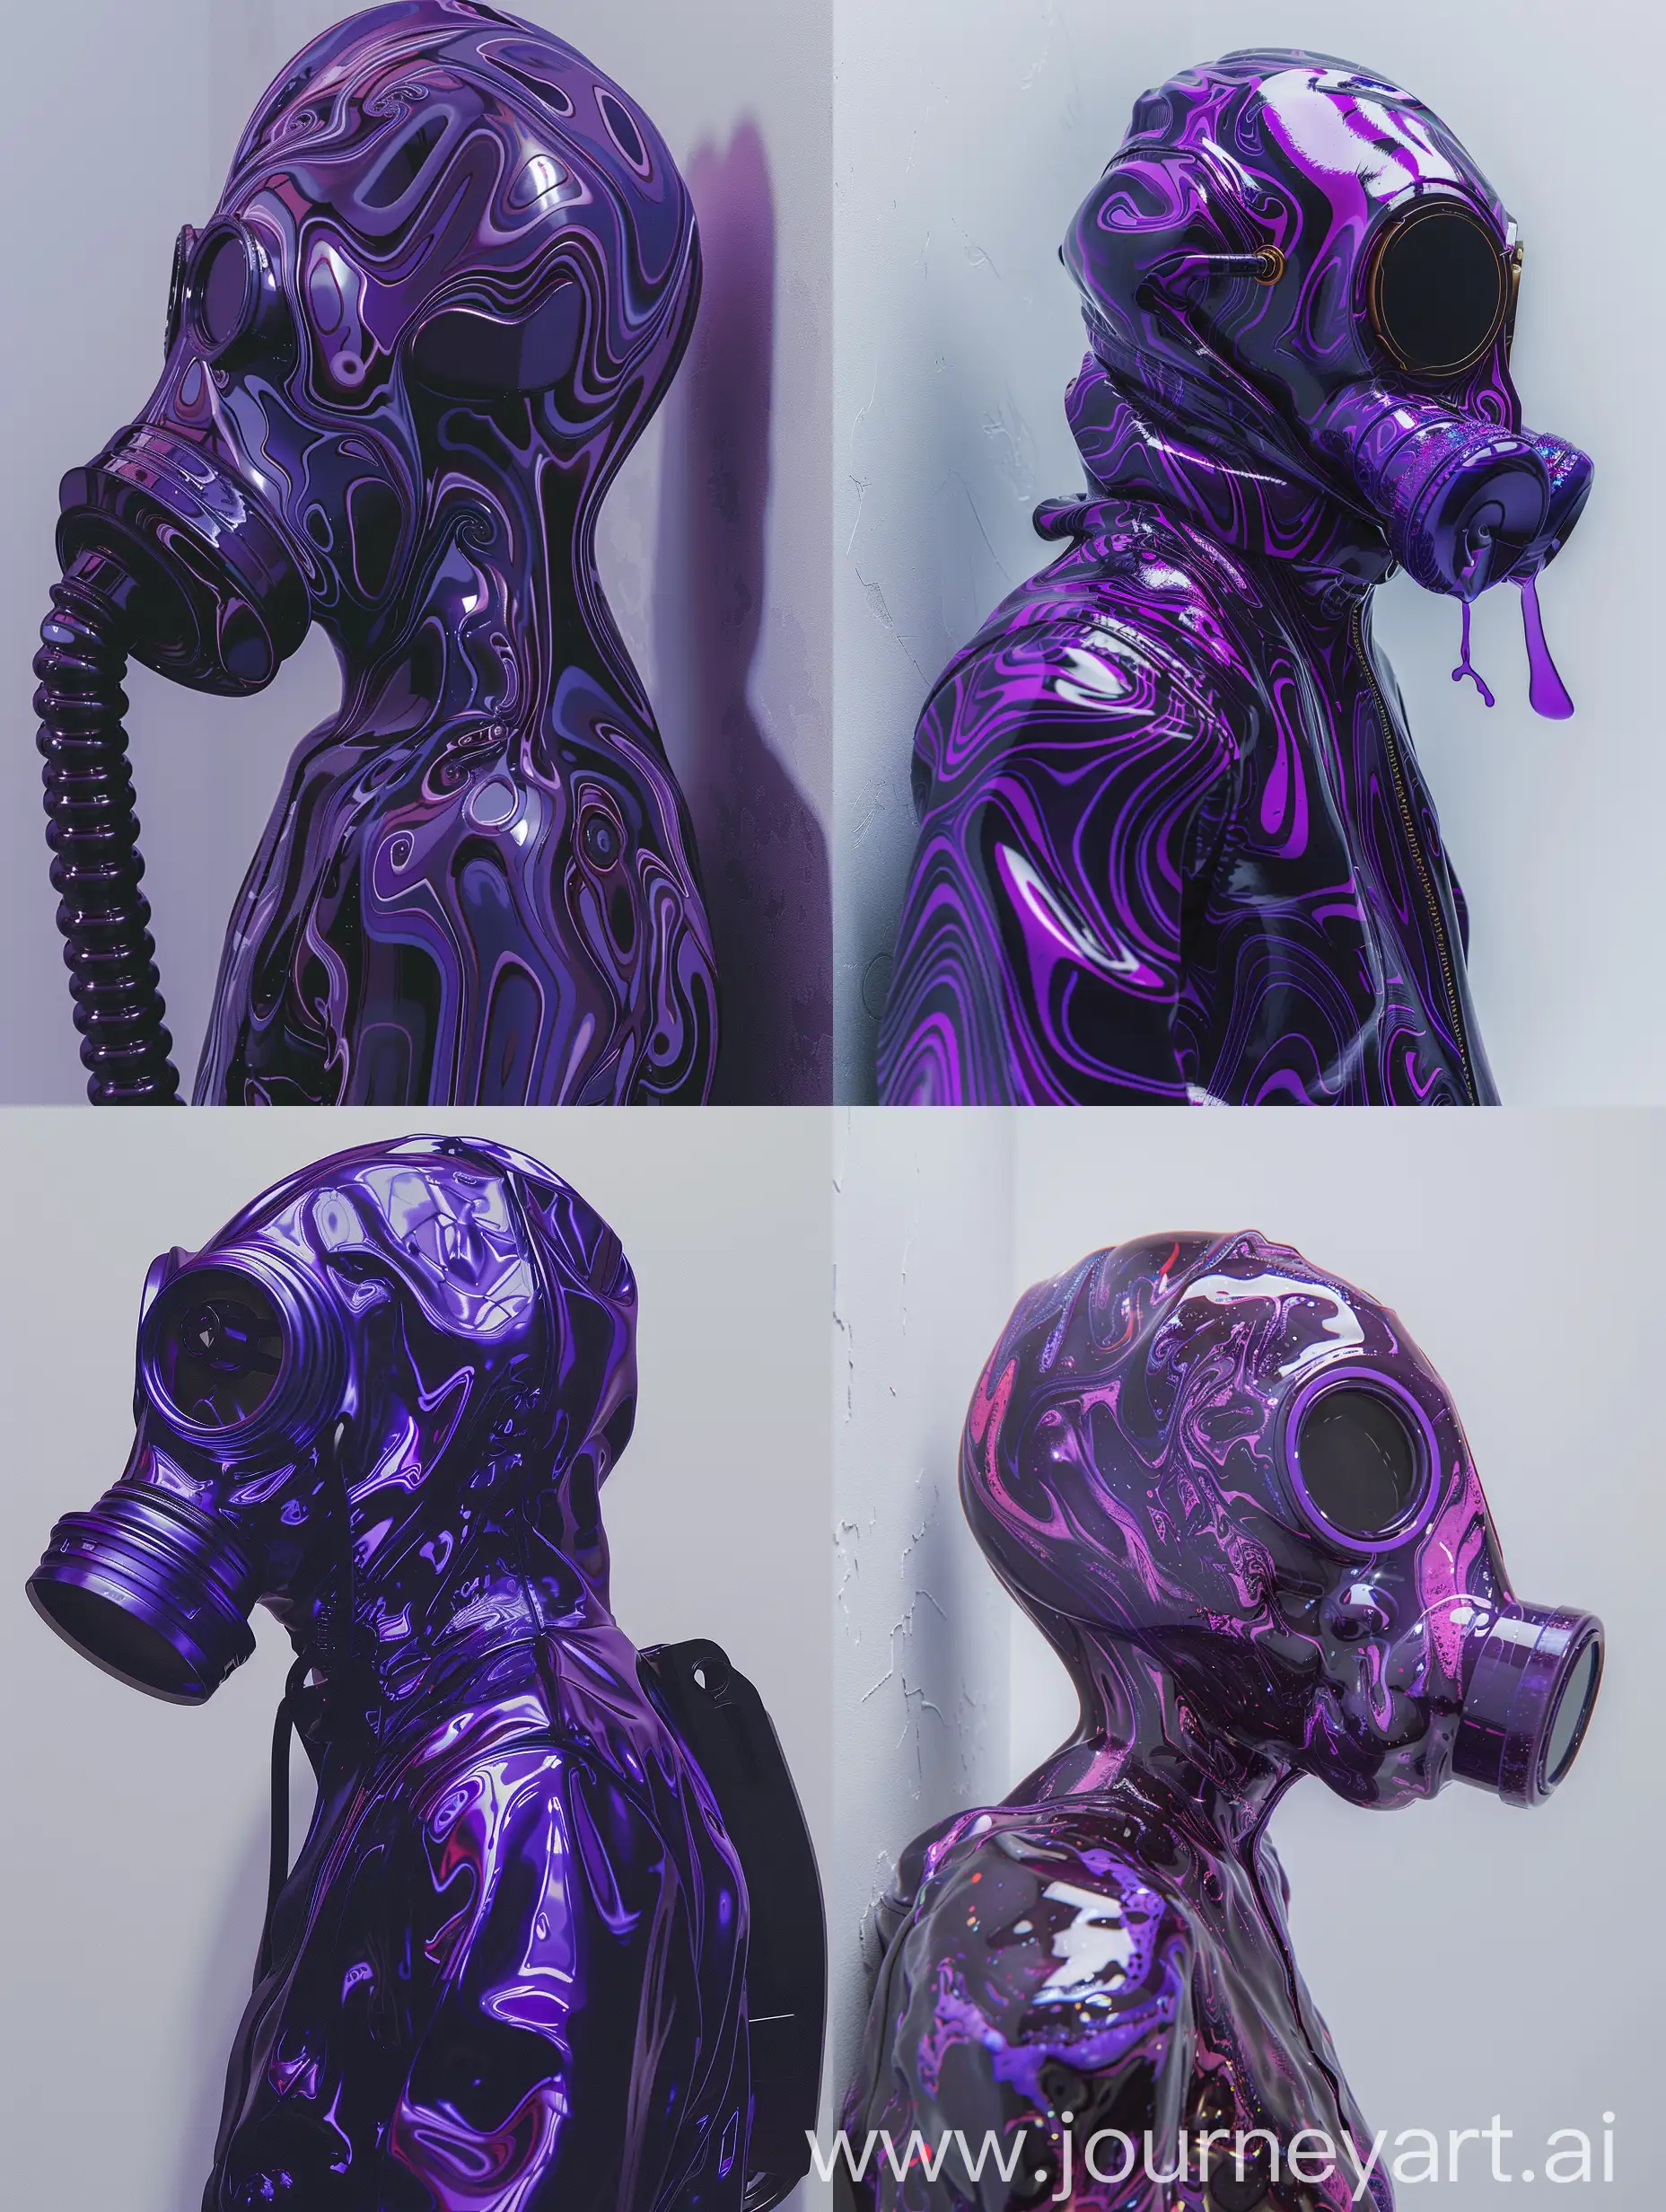 Glossy-Cybernetic-Purple-Gas-Mask-Beauty-with-Abstract-Distortion